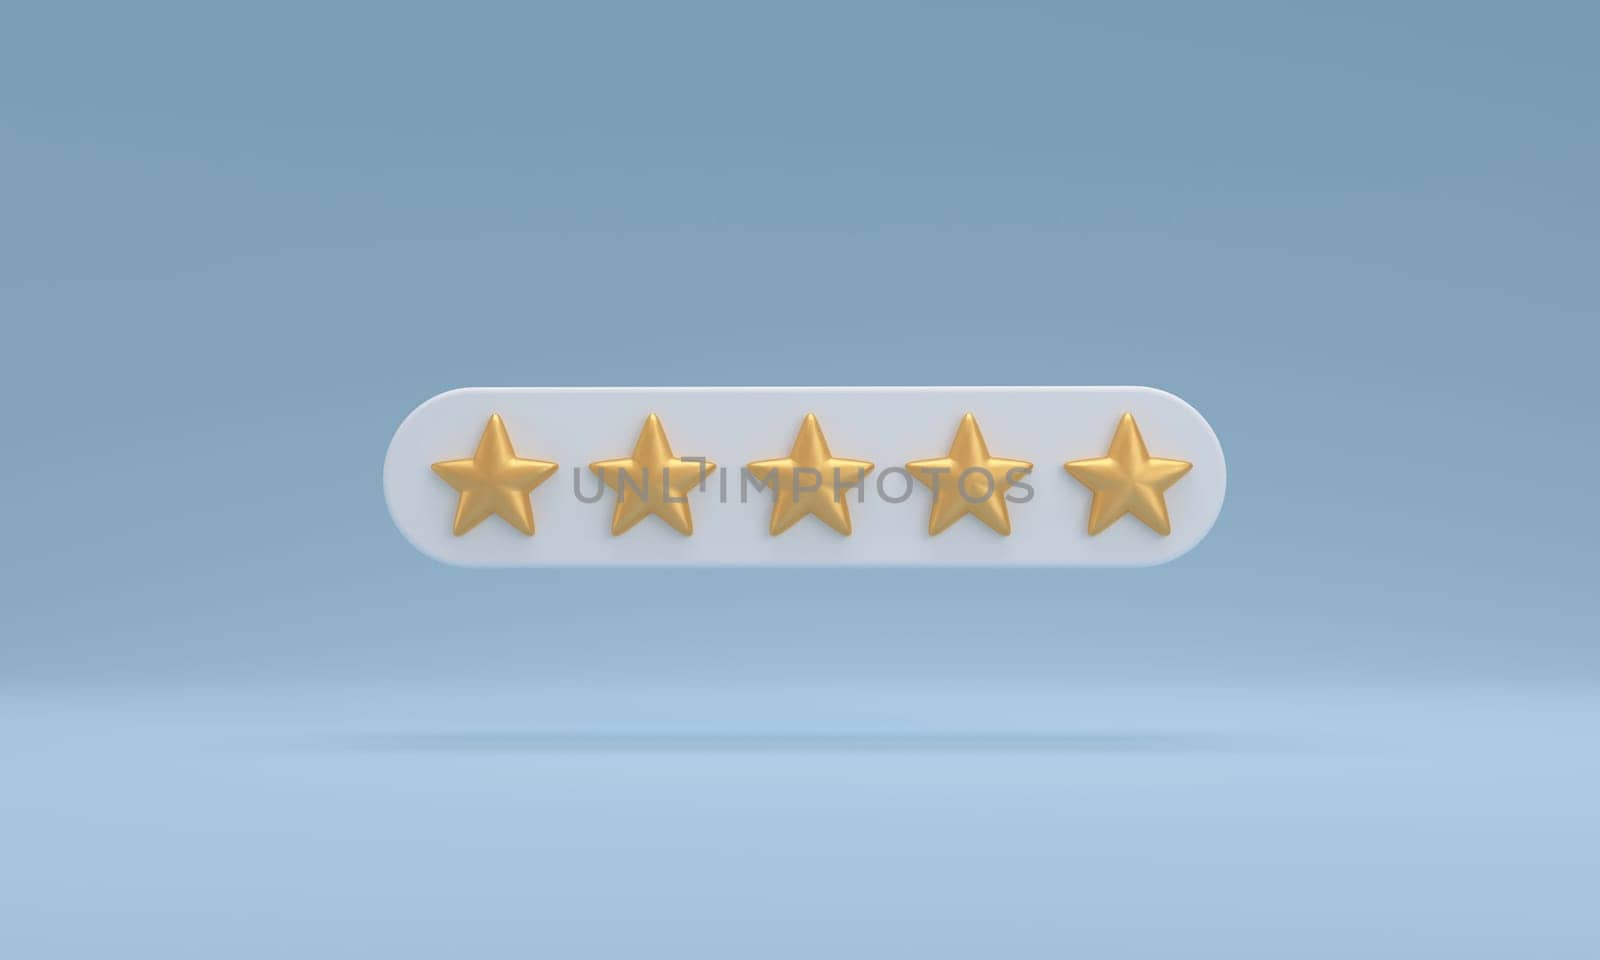 Bubble rating five golden stars for best excellent services rating for satisfaction. Customer rating feedback concept. by ImagesRouges